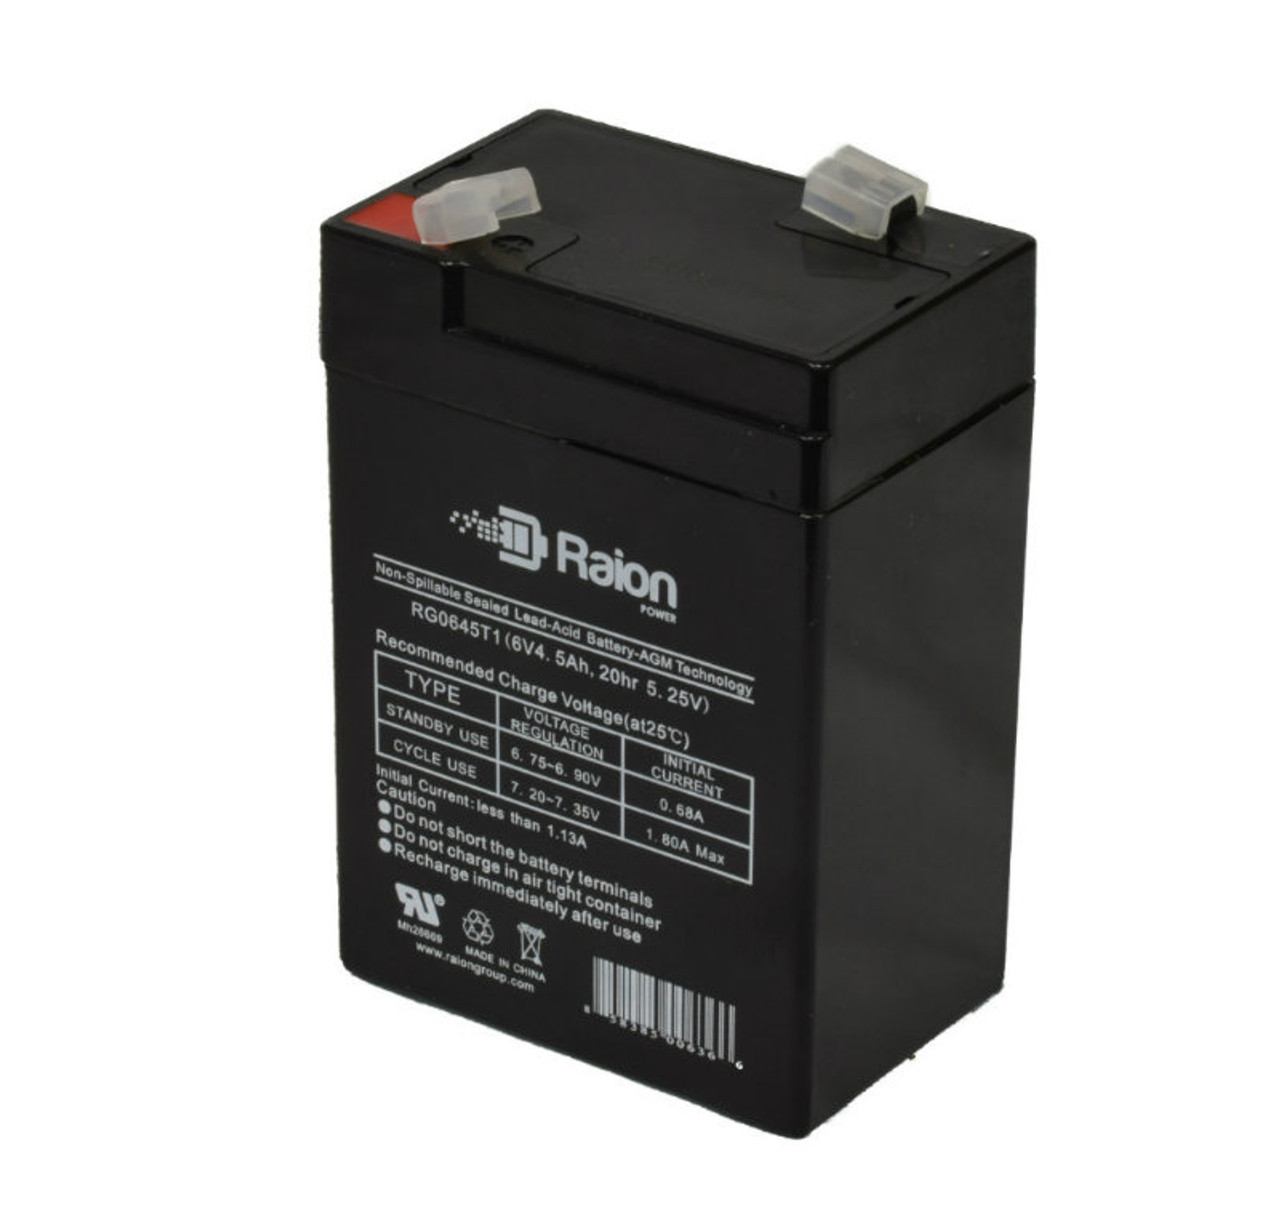 Raion Power RG0645T1 6V 4.5Ah Replacement Battery Cartridge for Peg Perego IGED1135 6V RCX